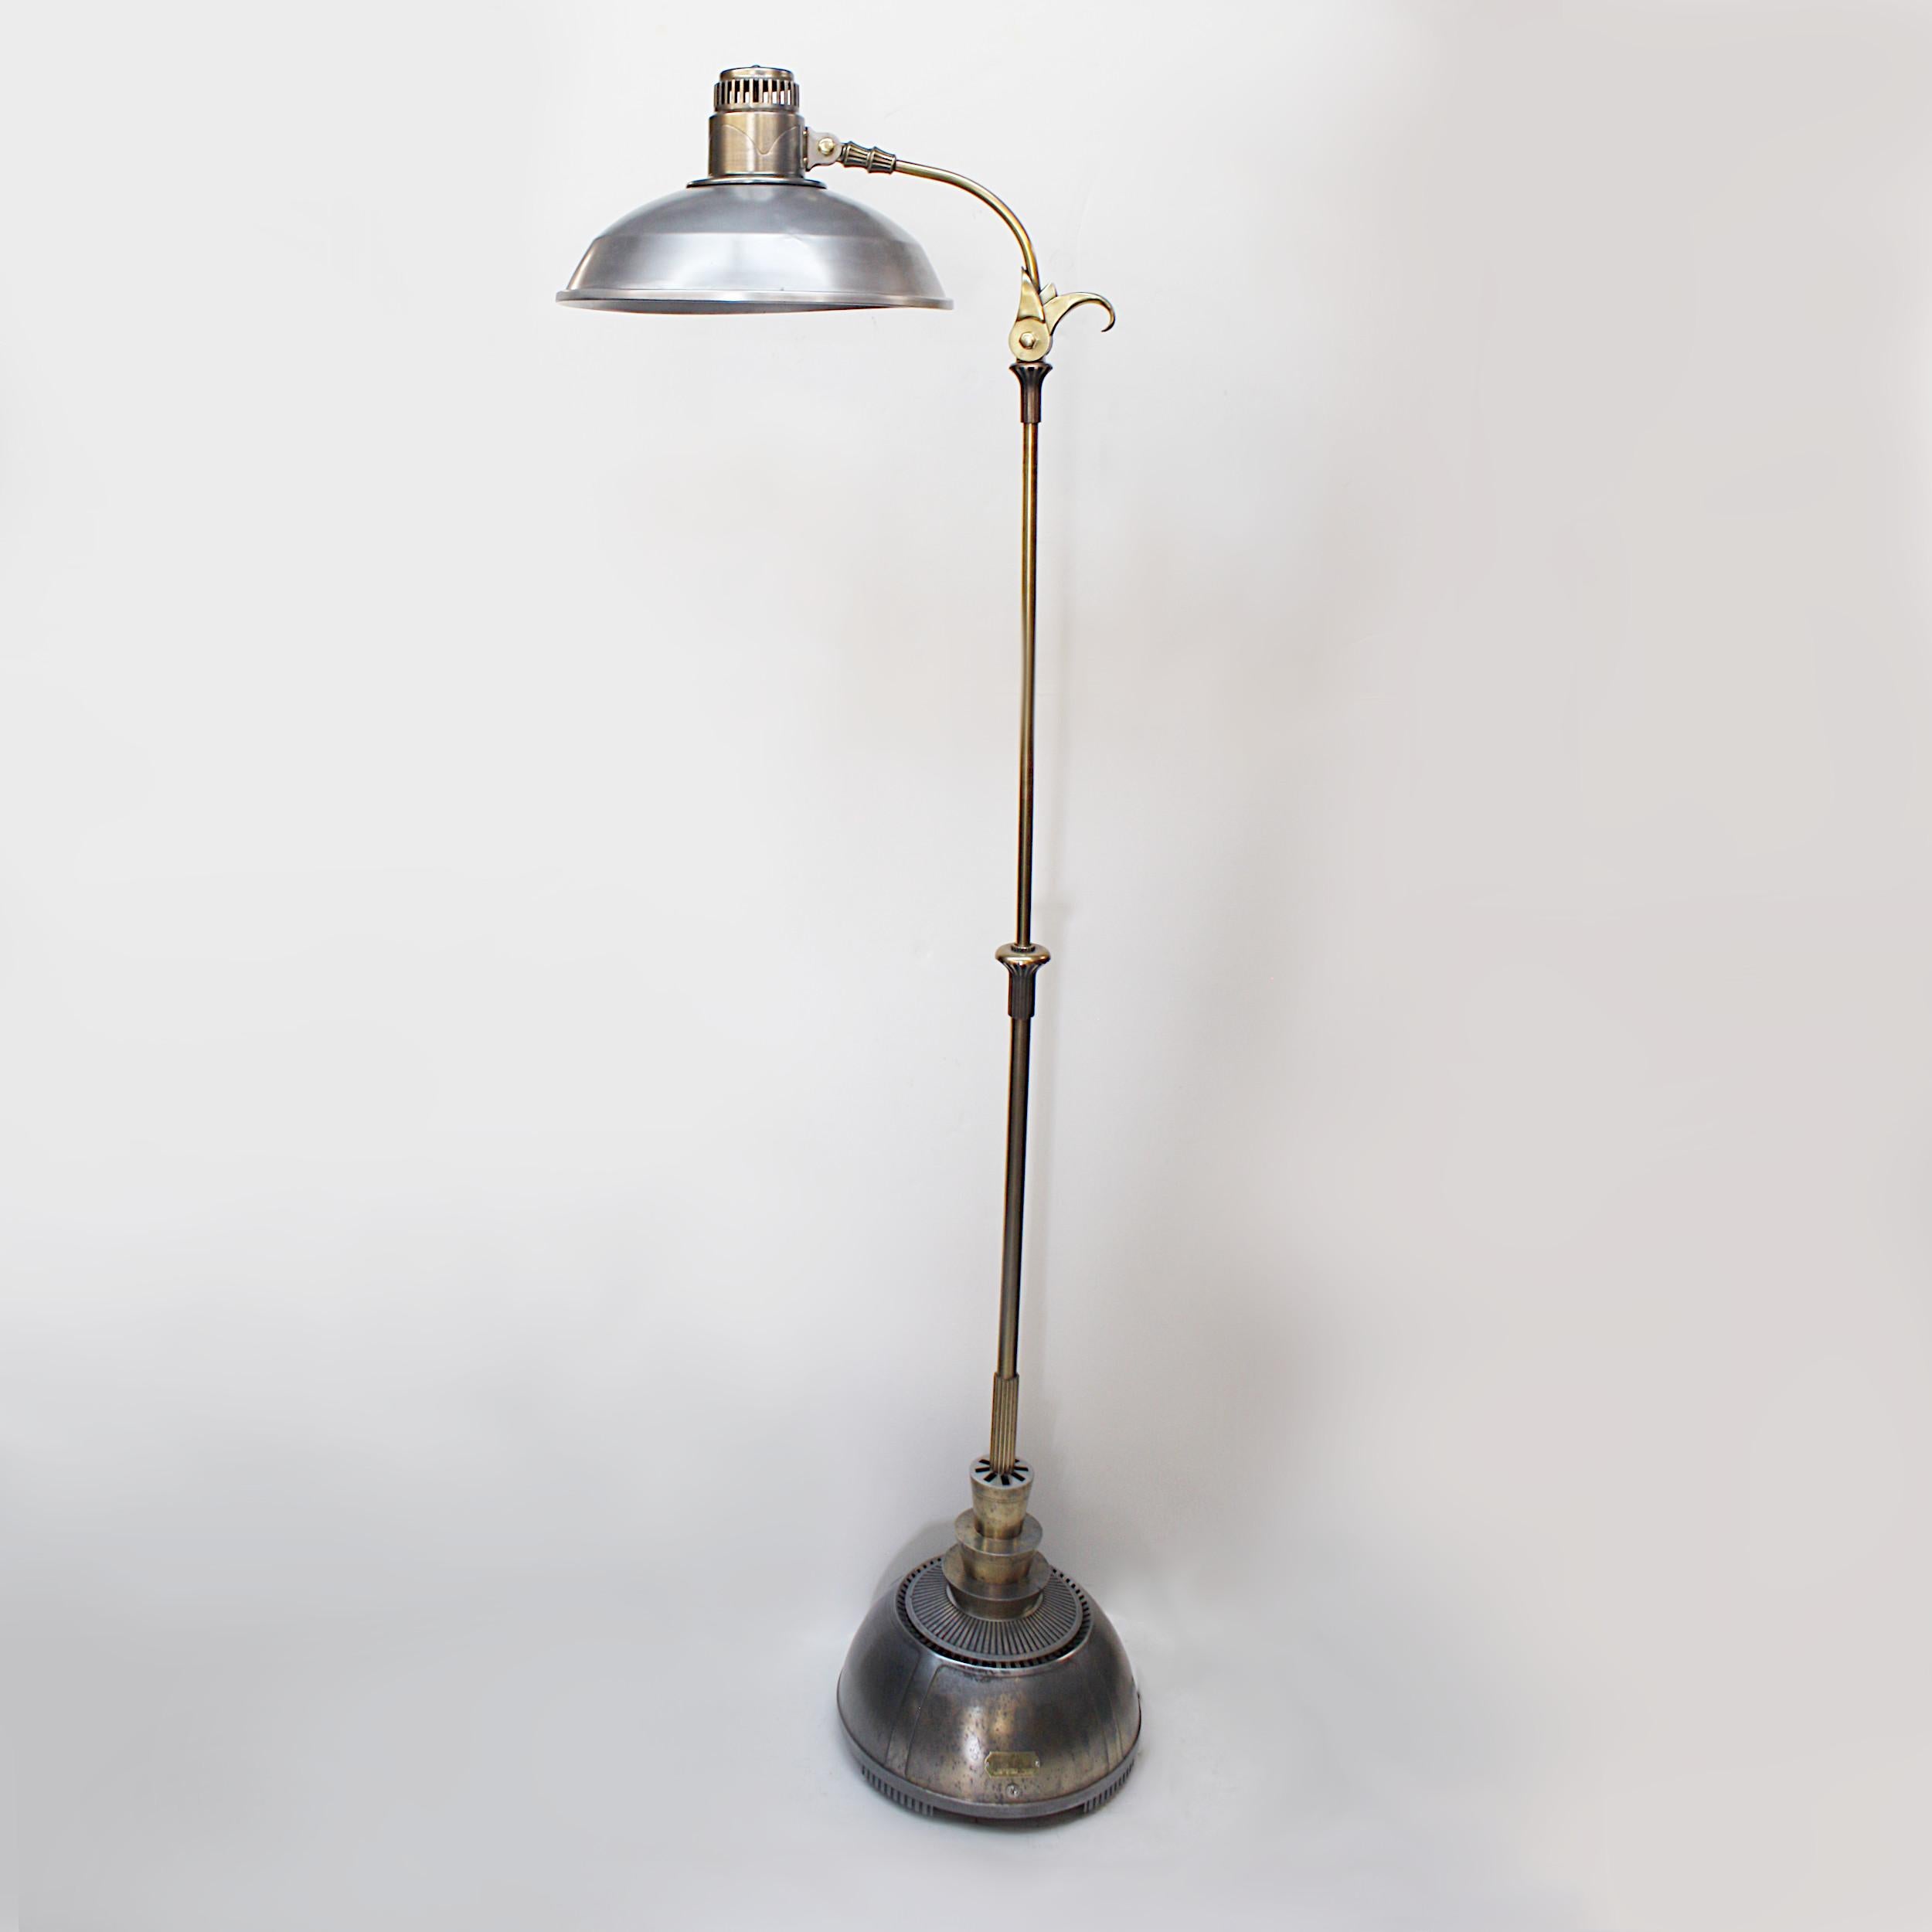 This rare and wonderful floor lamp began life as a 1940s GE Sunlamp, a device that claimed no true therapeutic or medical benefits but stated its purpose as a rather questionable 